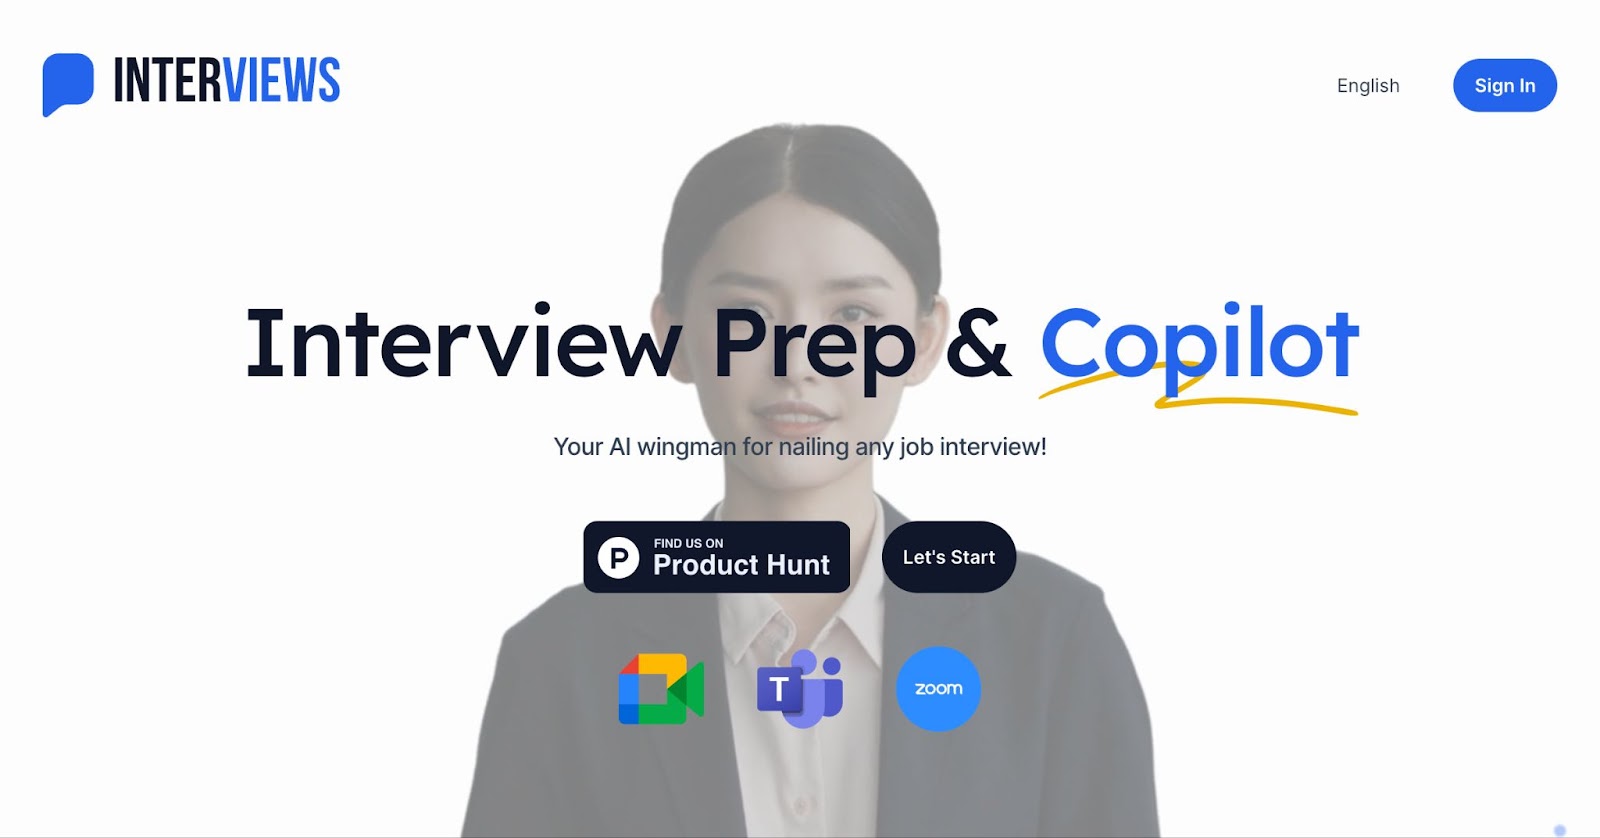 Interviews Chat Launches AI-Powered Copilot for Real-Time Interview Support